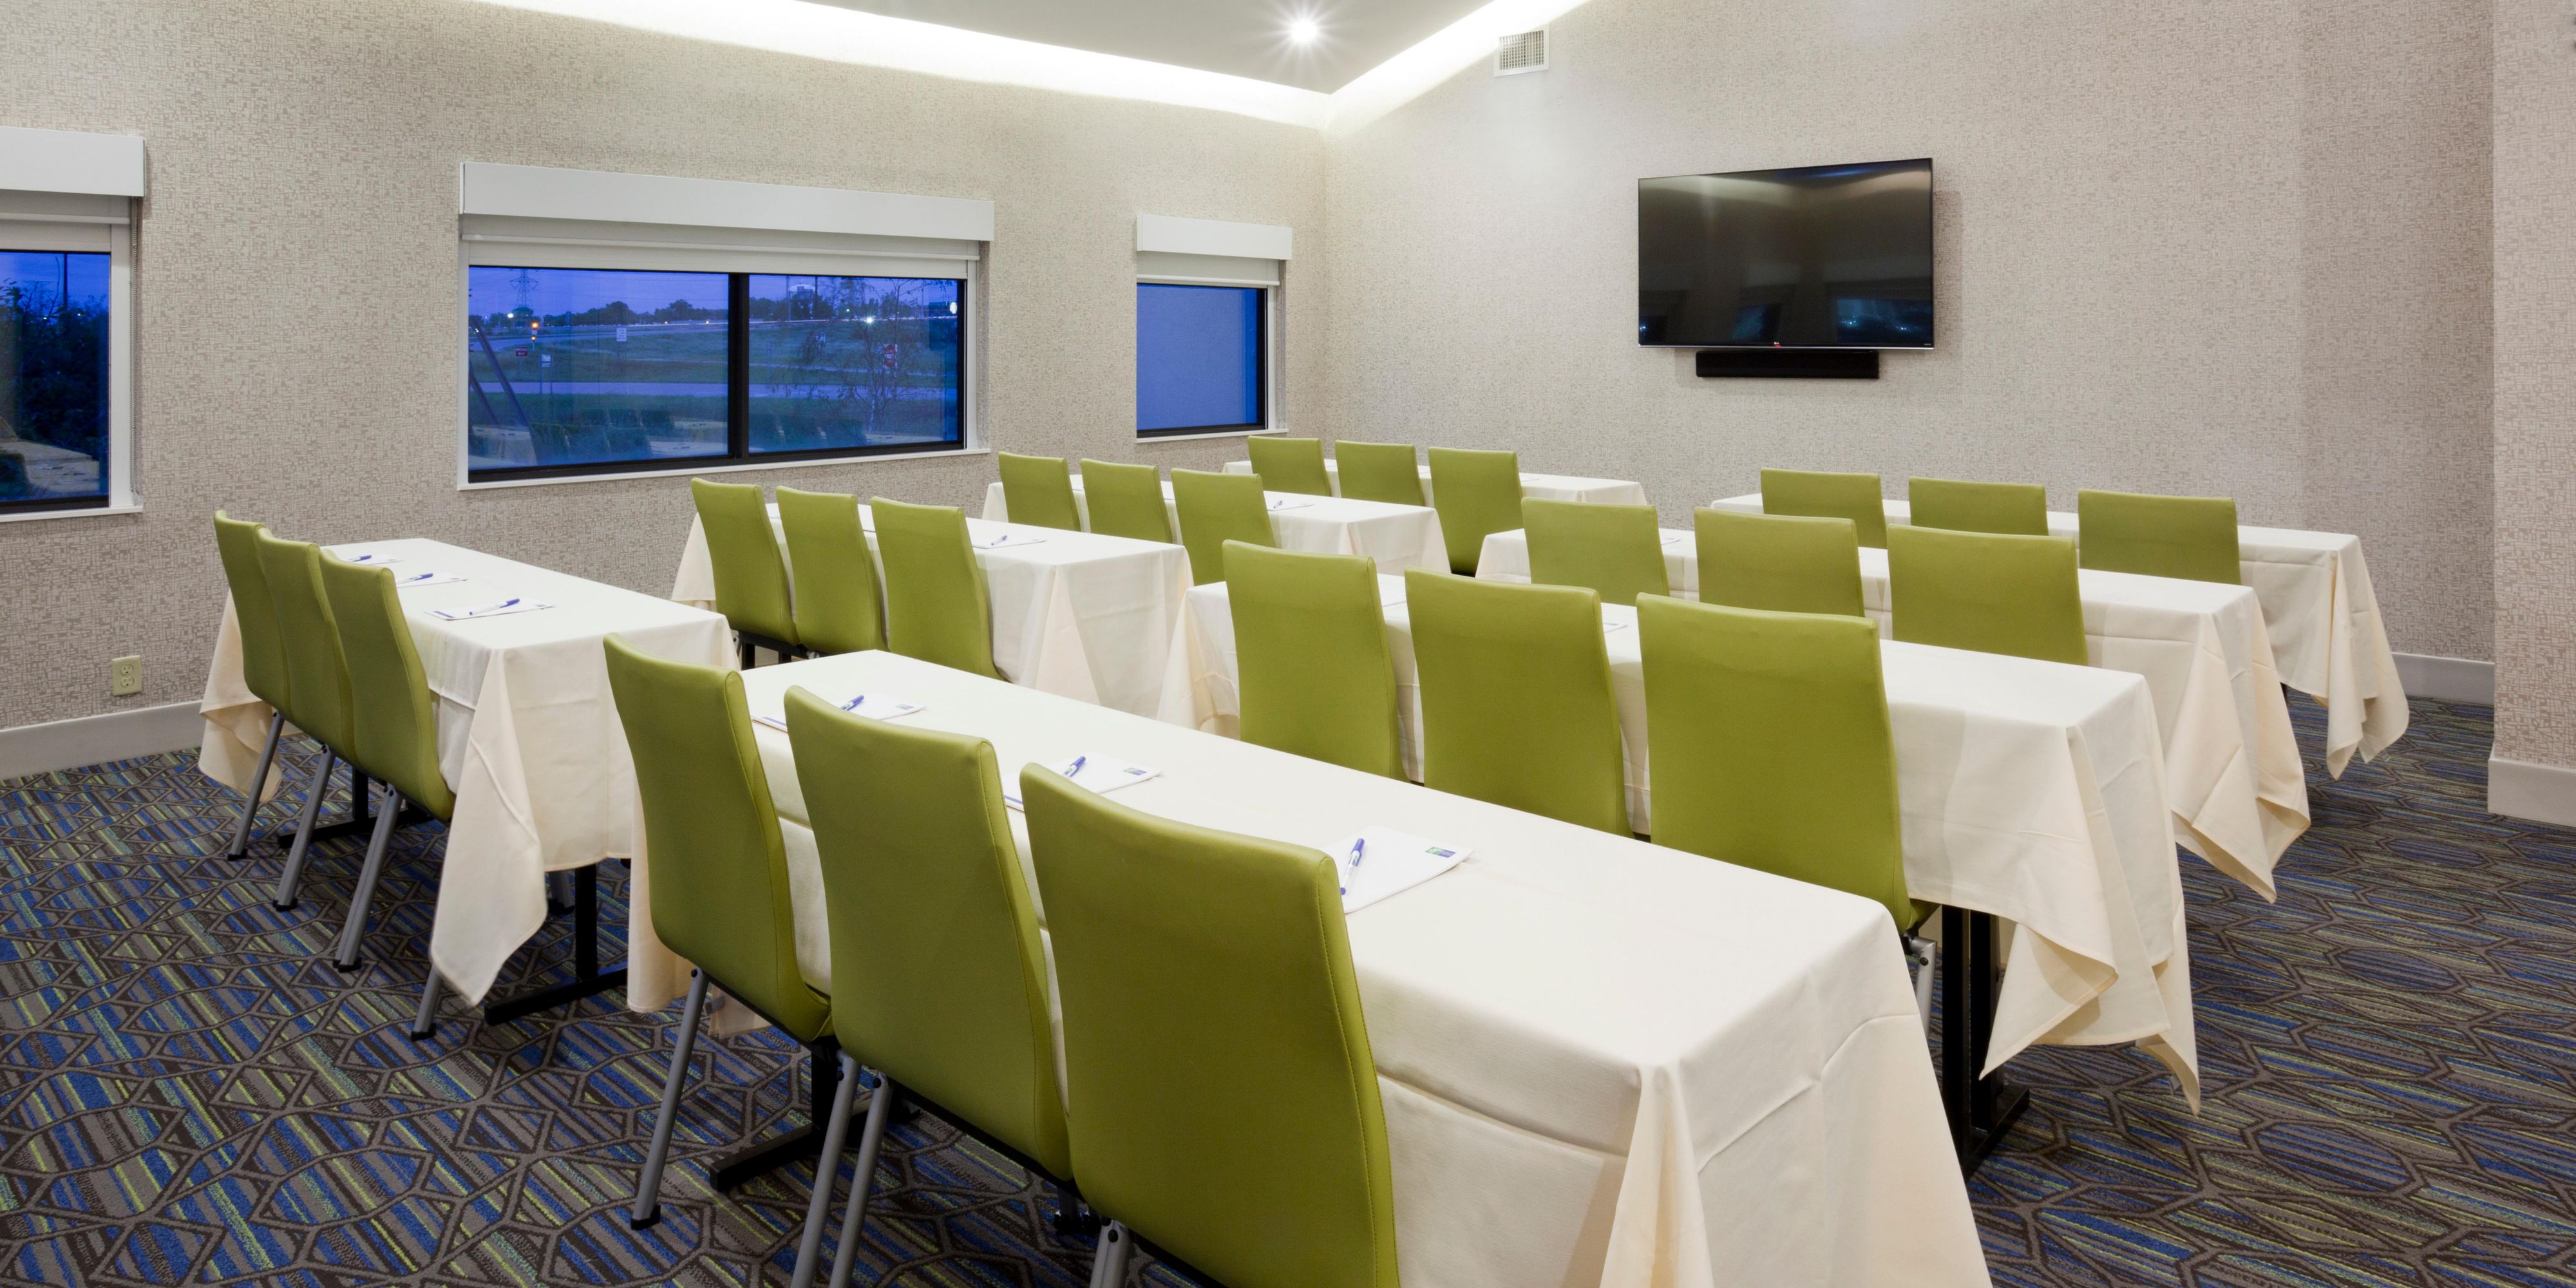 Our hotel offers 840 sq. ft of flexible meeting space for your important meetings or casual get-togethers for up to 58 people!